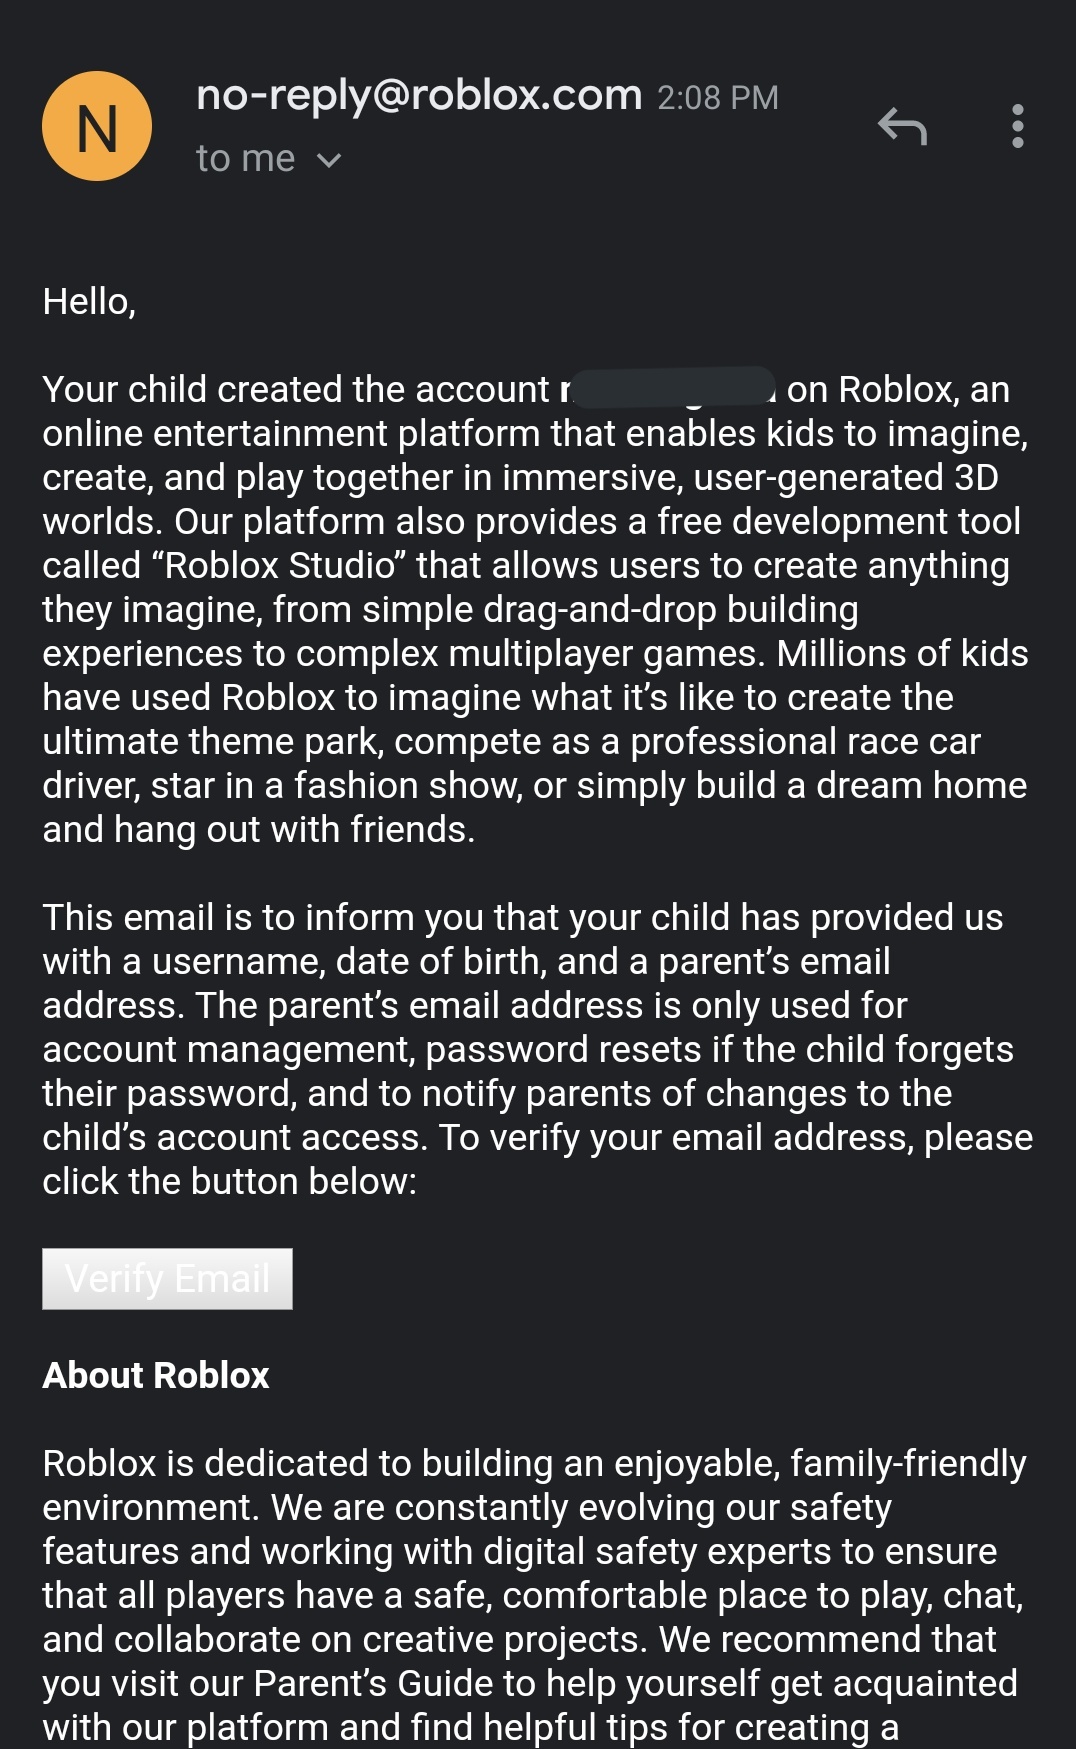 Mikehaze On Twitter I Get This Msg Everyday From Roblox About A Child Who Needs Me To Verify Their Account So They Can Play I Tried To Verify The Email But I - email verified roblox accounts